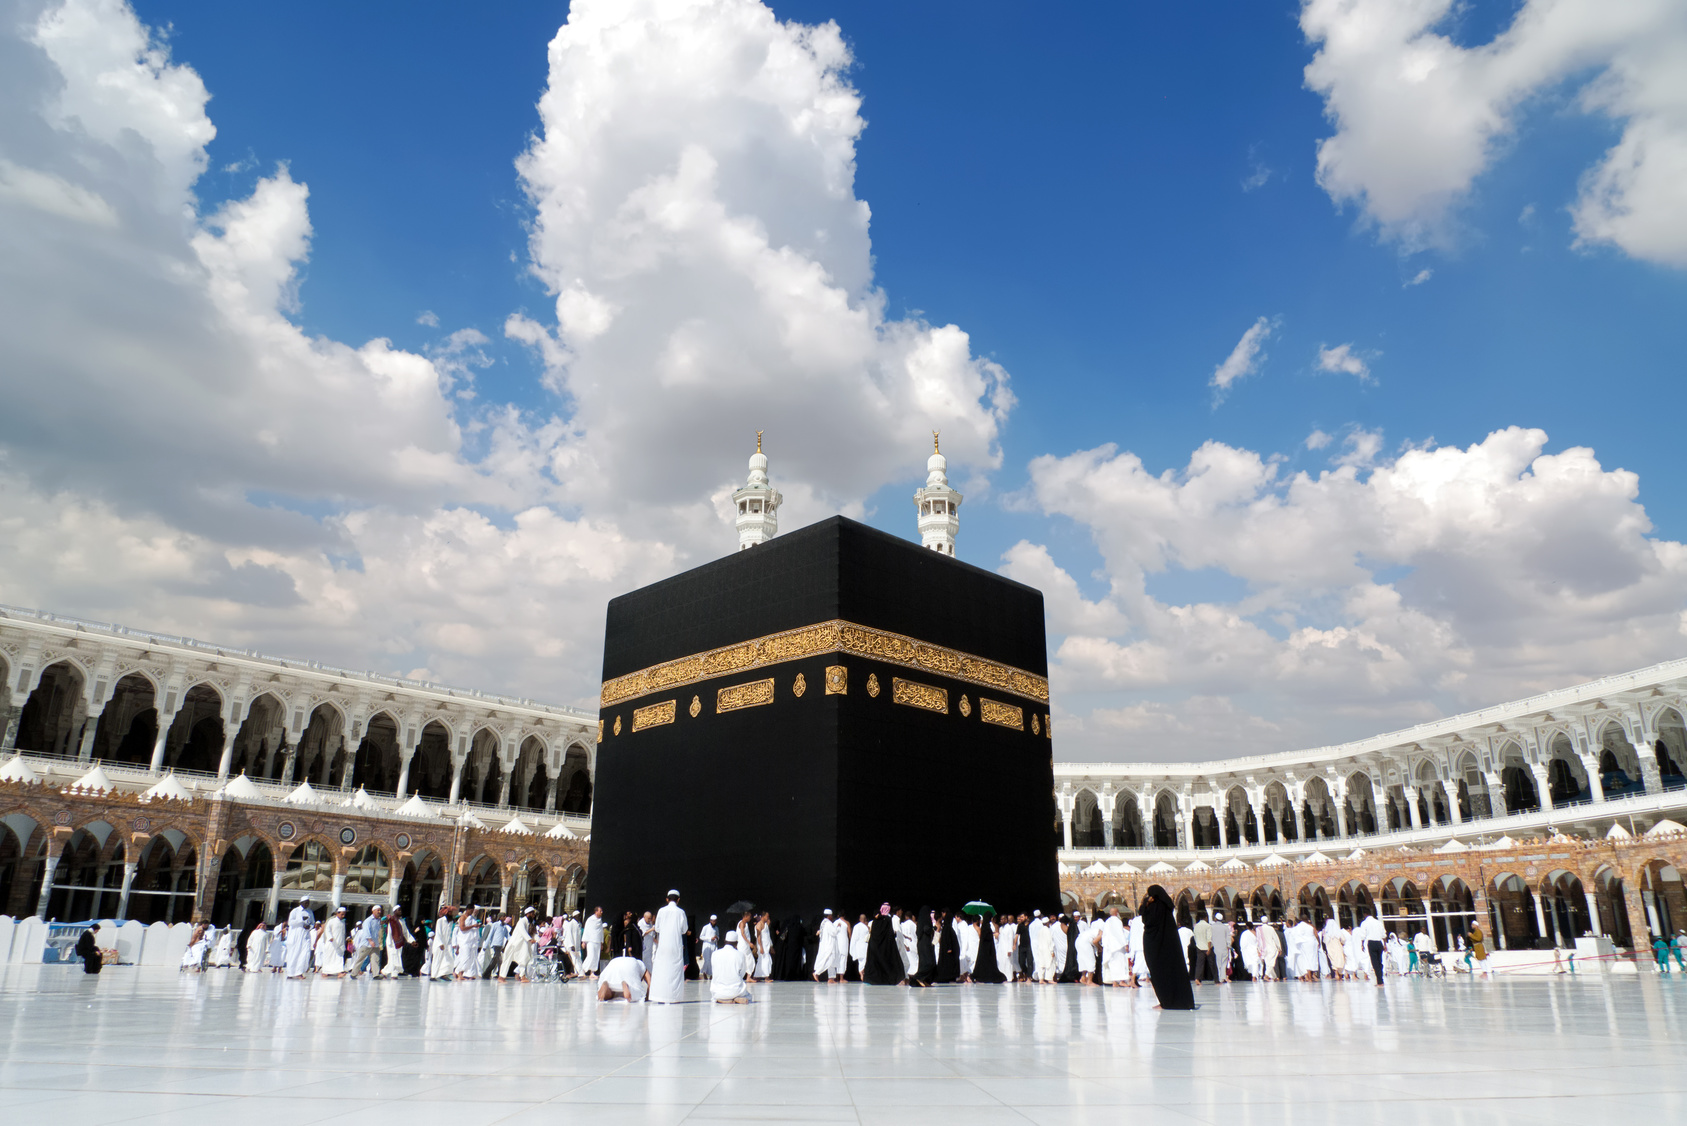 Umrah Packages: Umrah and Sustainability - Eco-Friendly Practices for Pilgrims